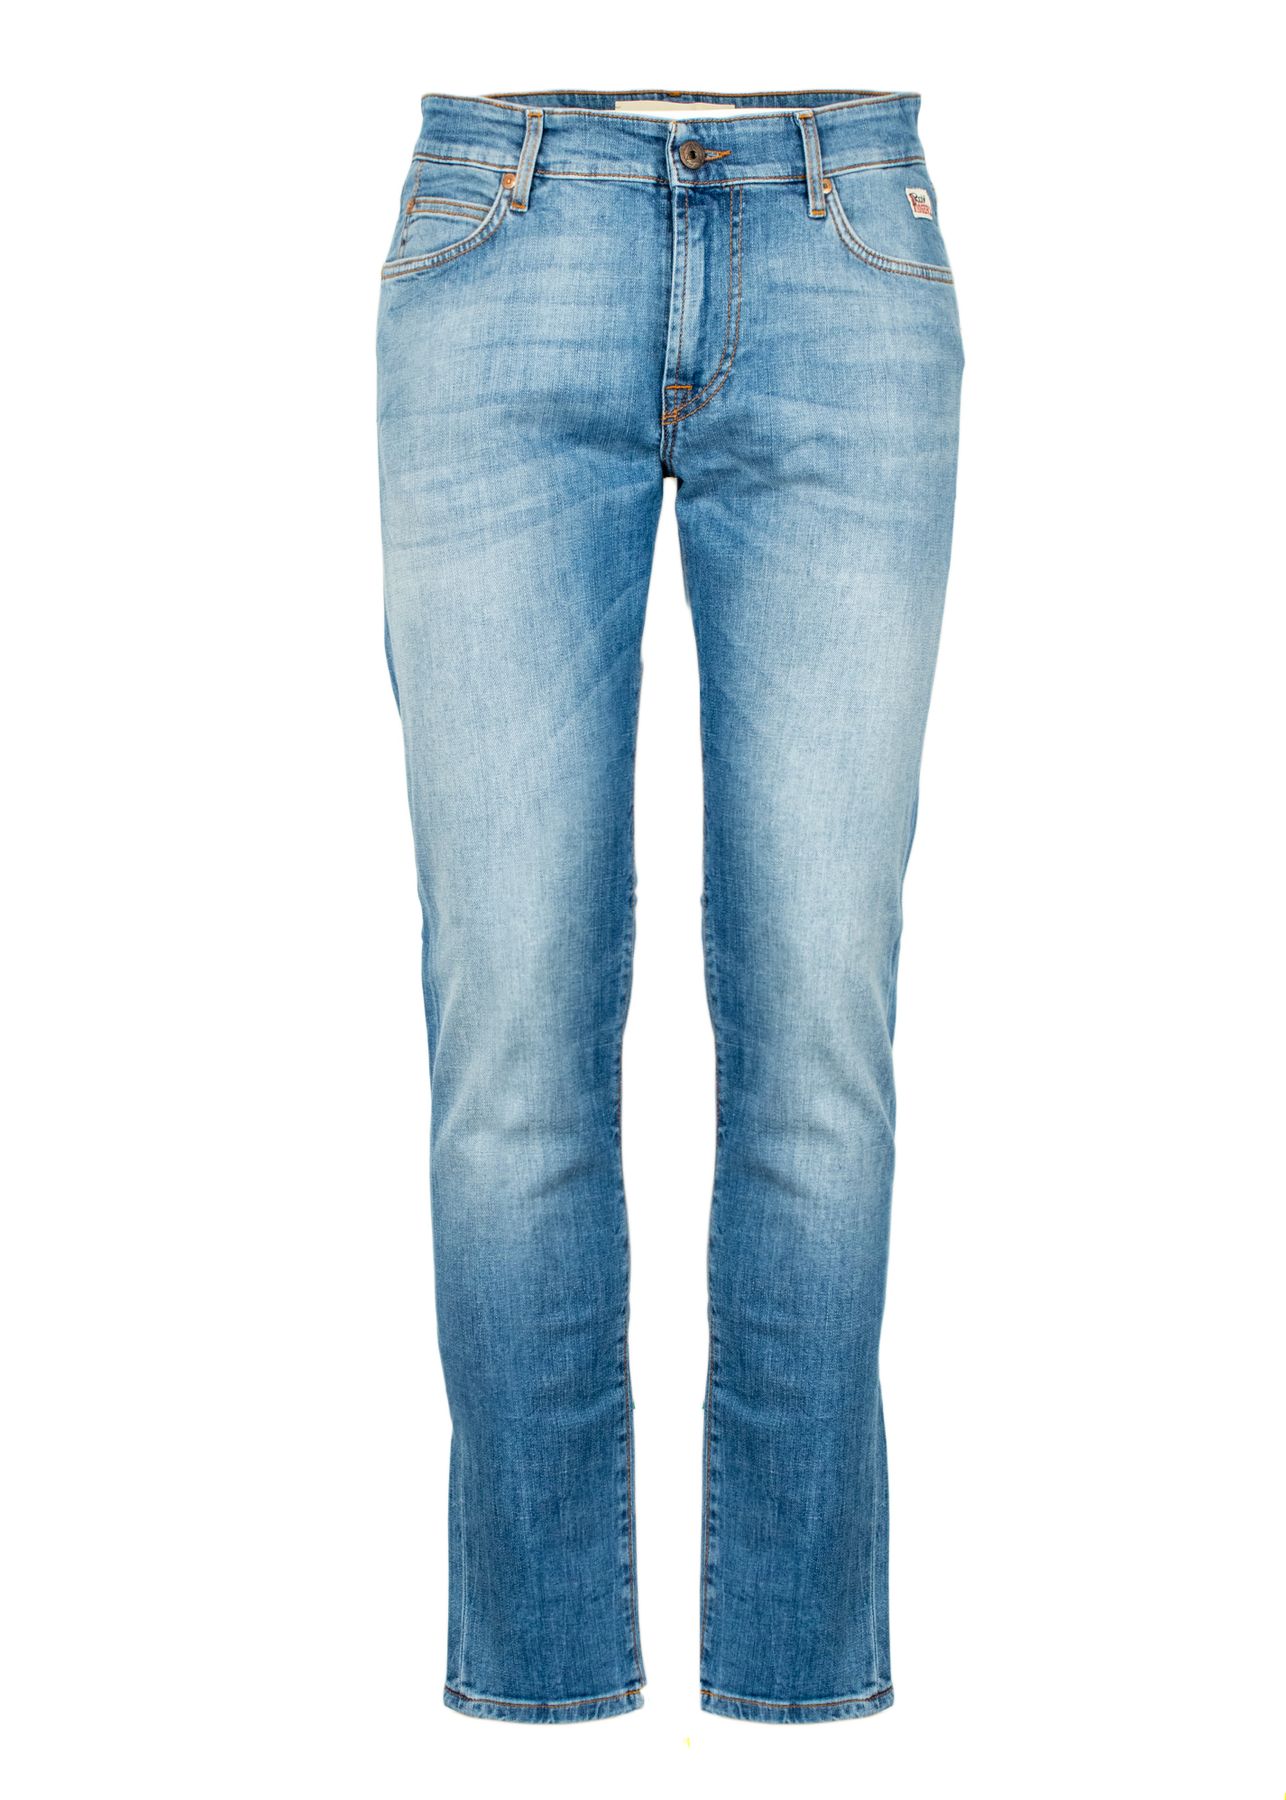 JEANS ROY ROGER'S - Immagine 1